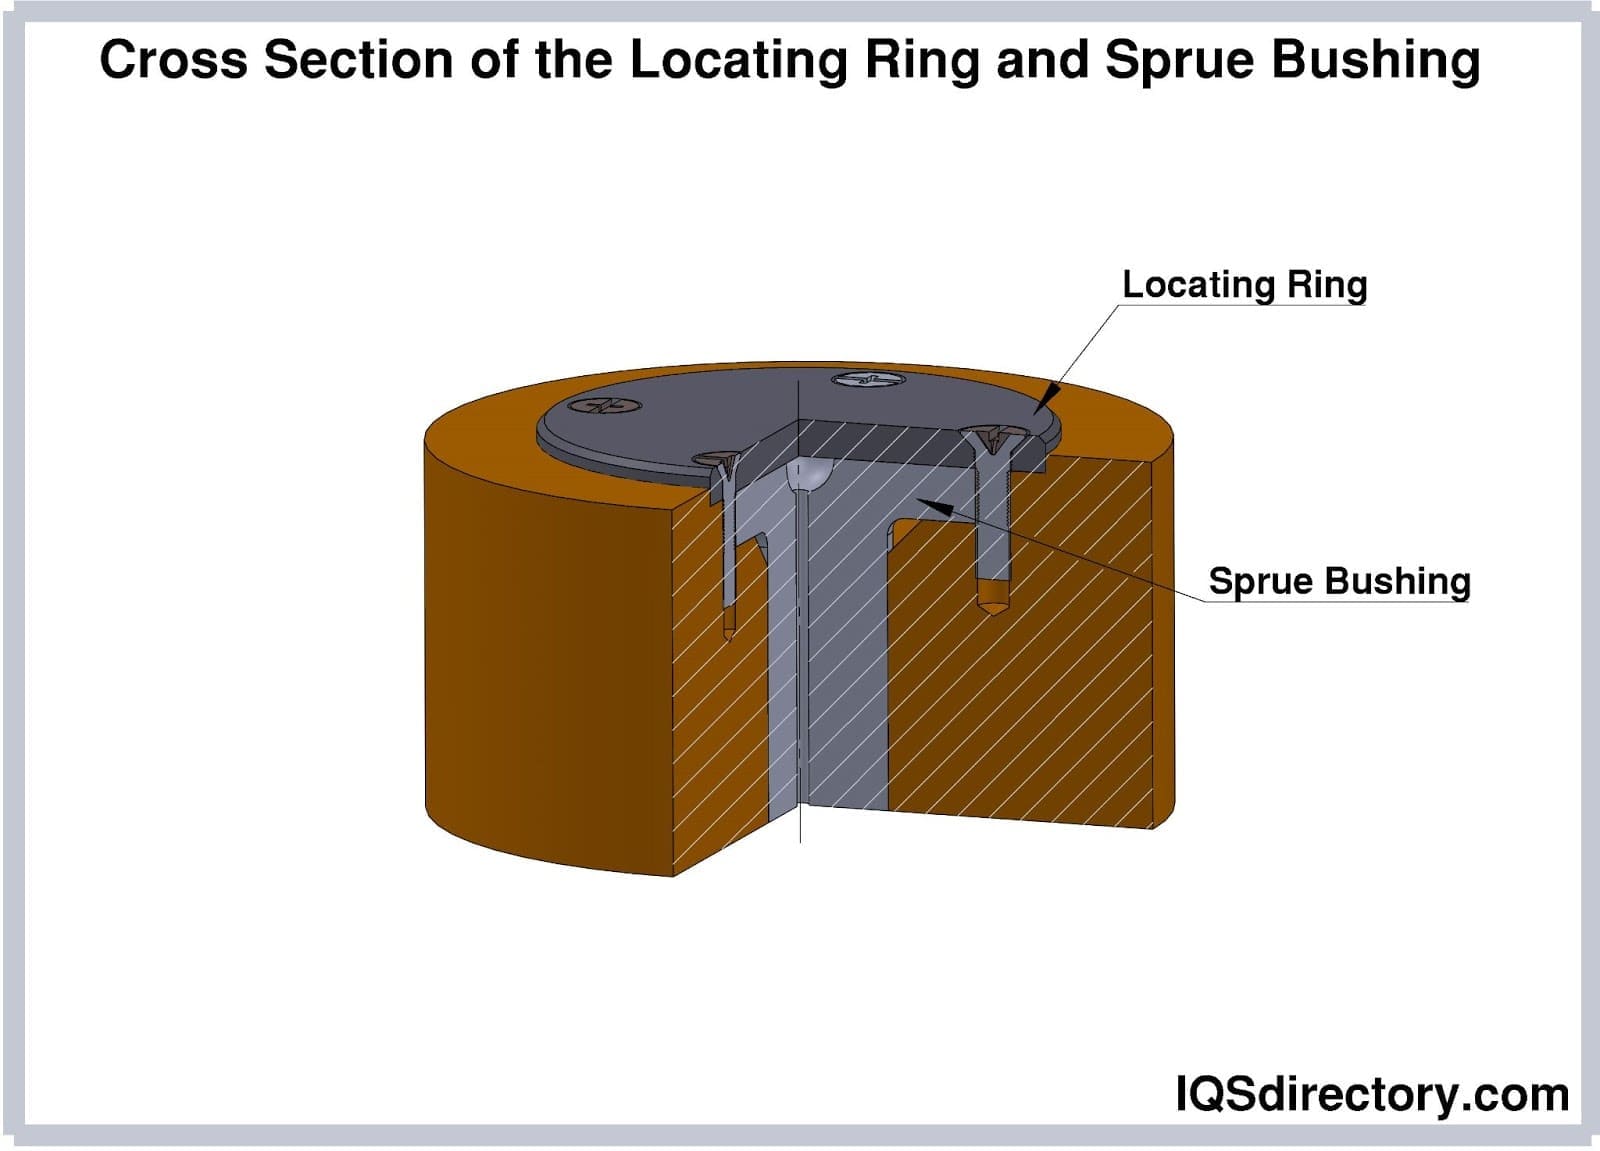 Cross Section of the Locating Ring and Sprue Bushing